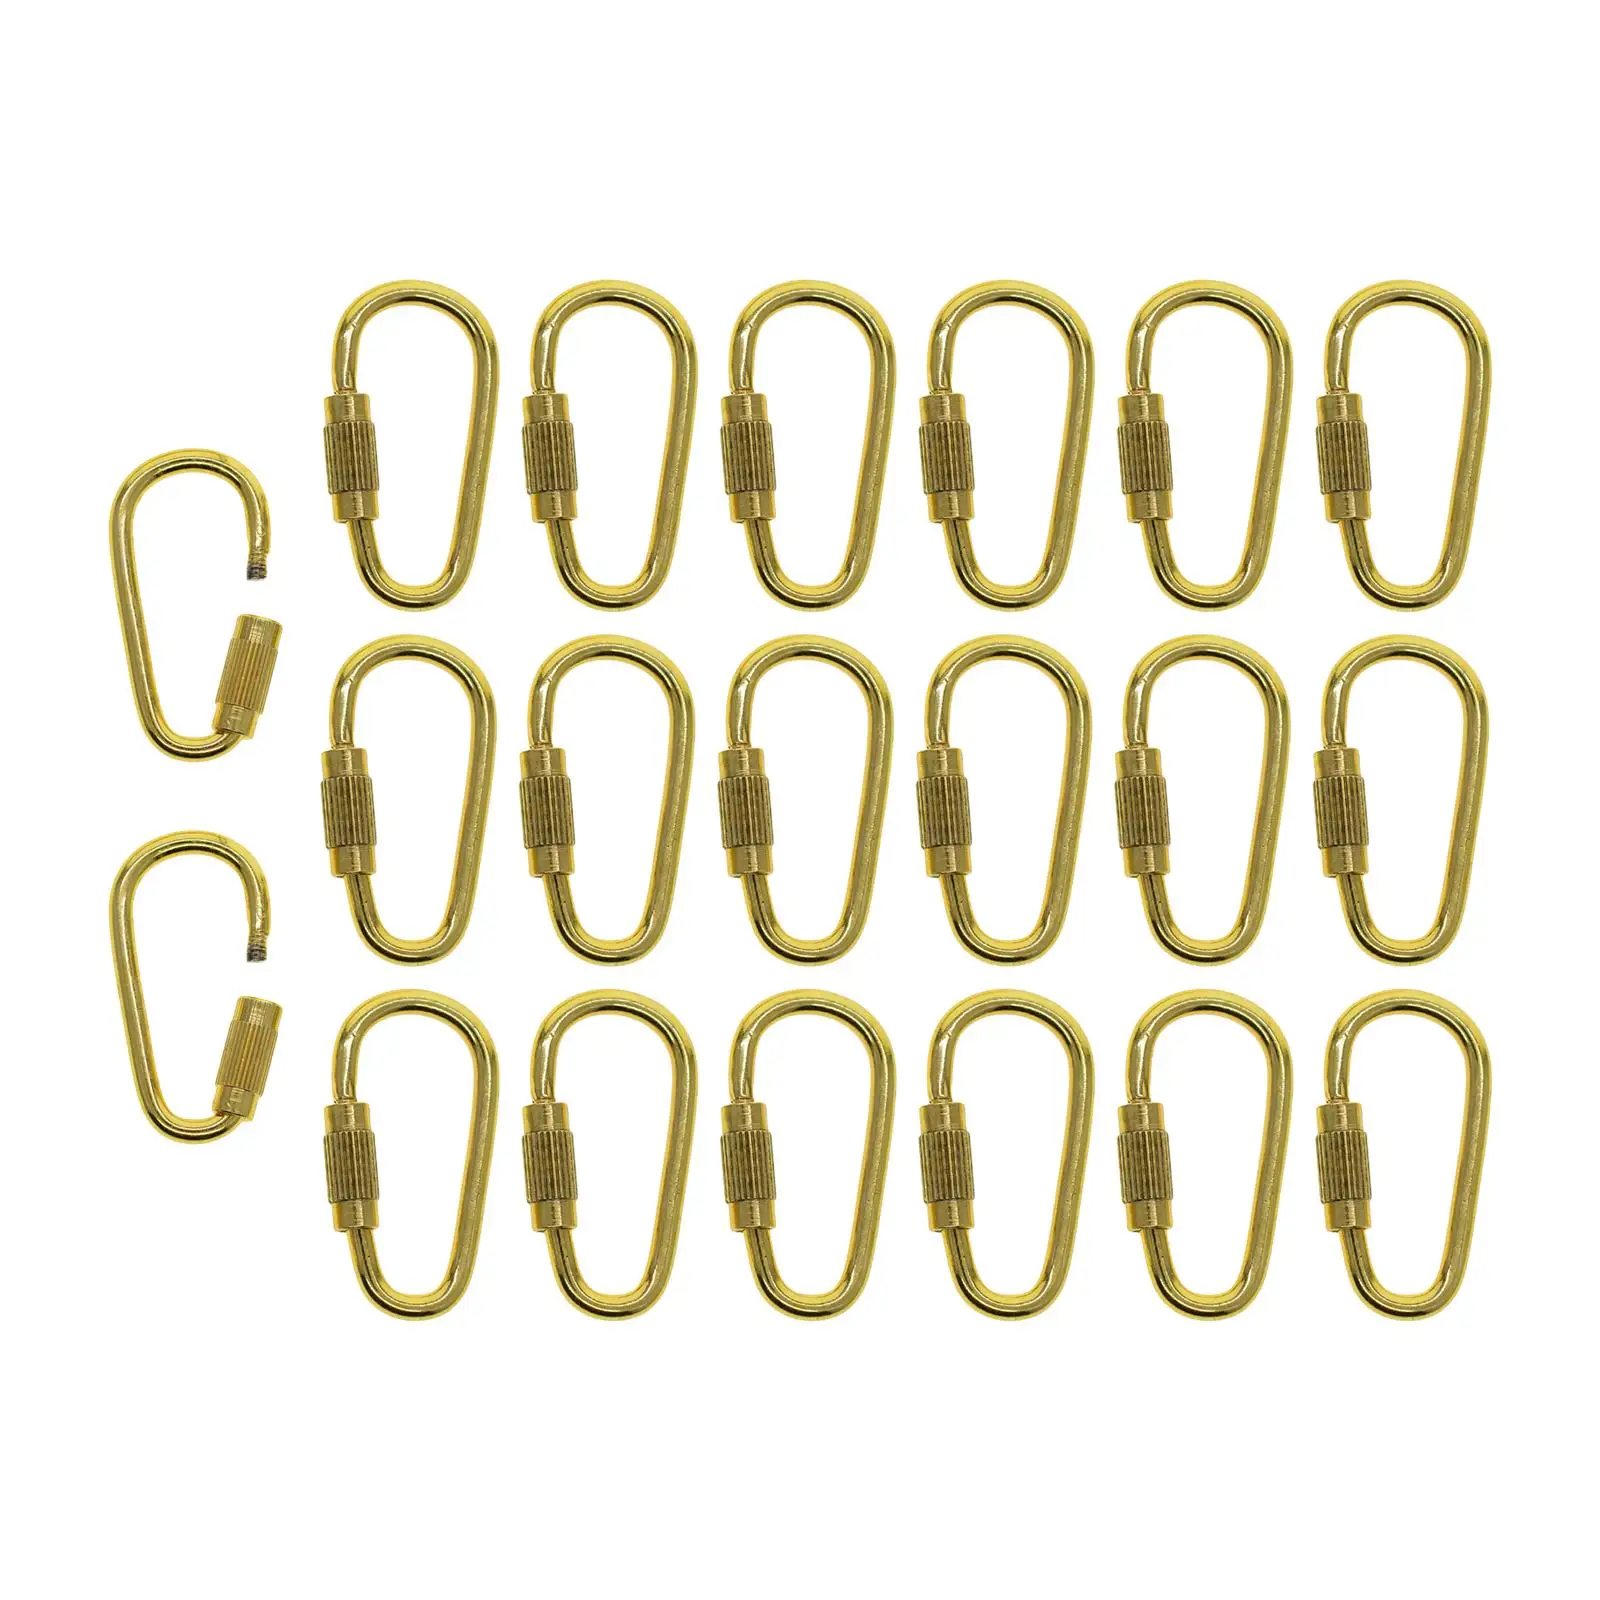 20 Pieces Locking Carabiner Key Ring Keychain Quick Release DIY Jewelry Clasps Hooks Screw Carabiners Outdoor Accessories